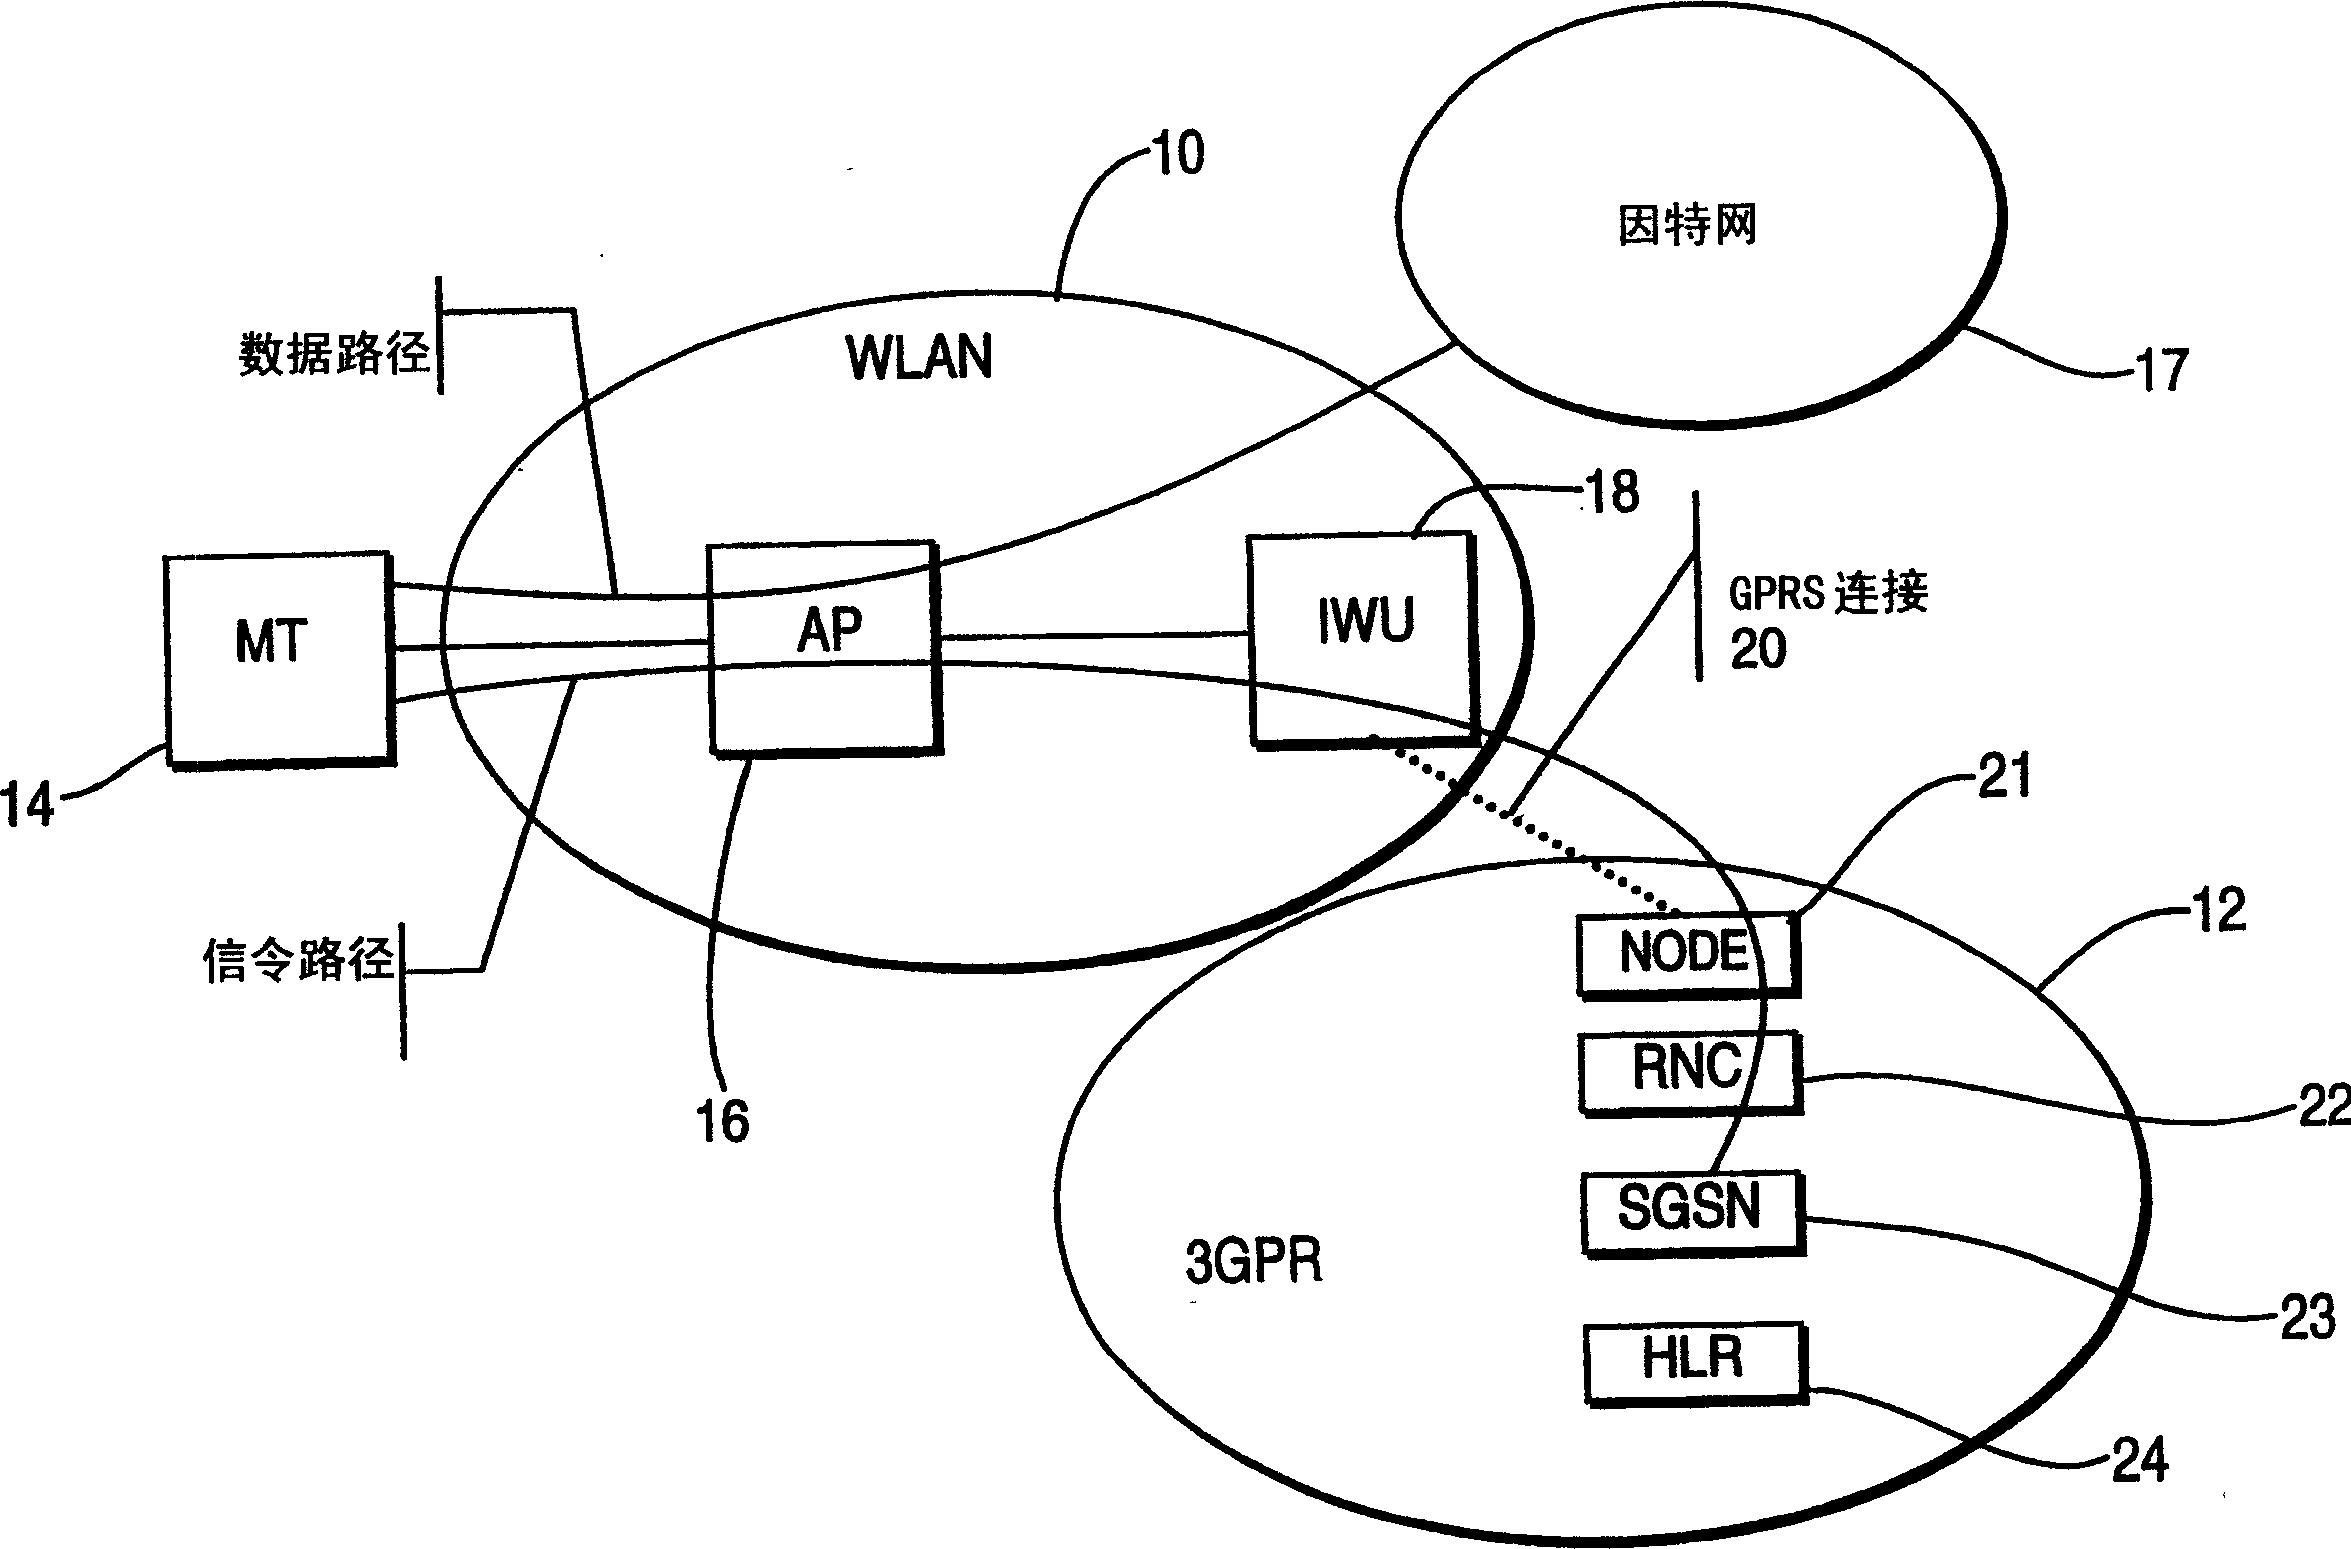 Technique for interworking a WLAN with a wireless telephony network